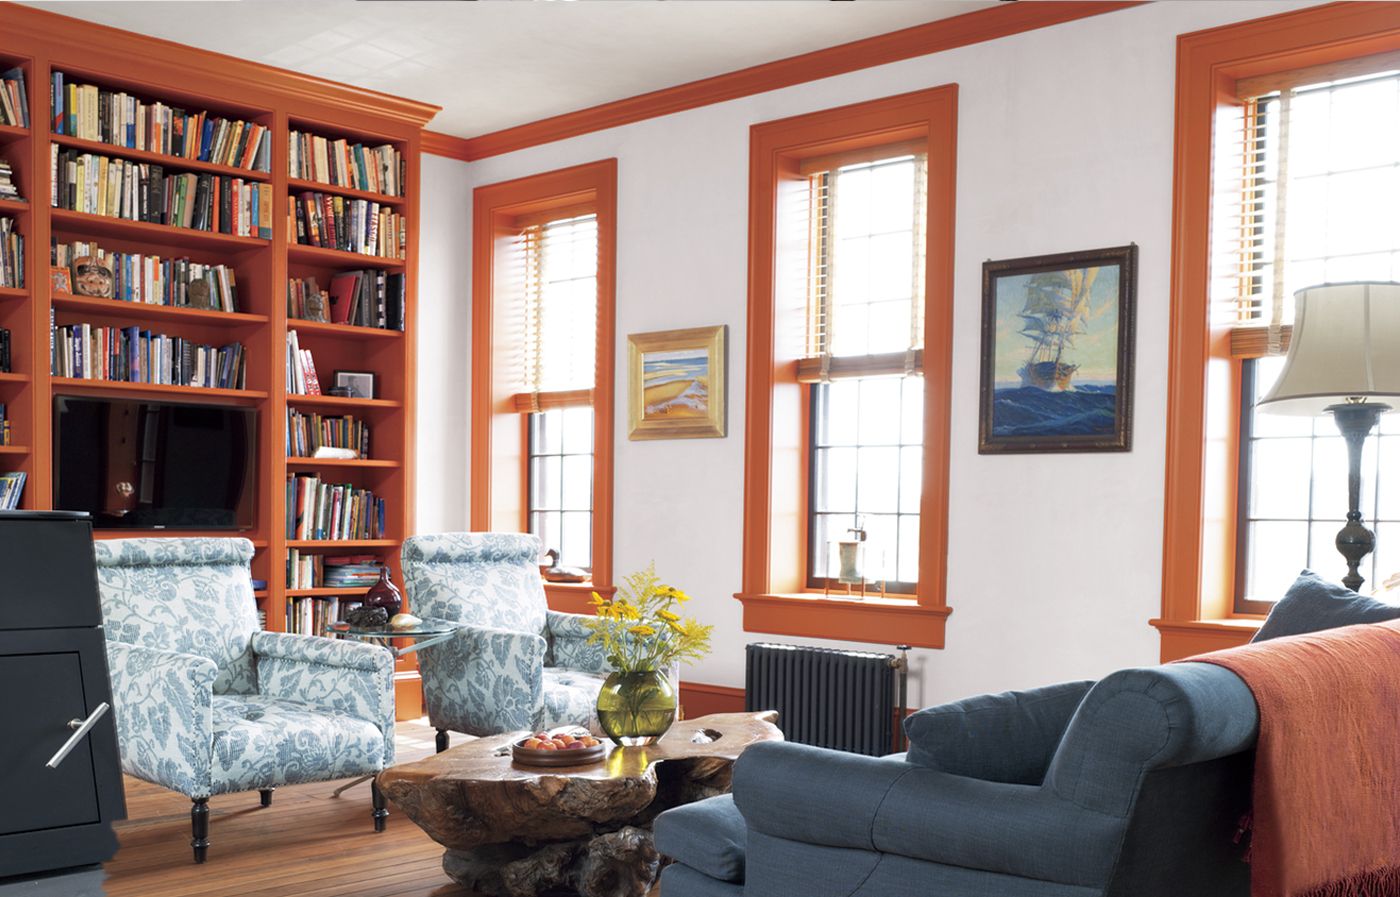 Interiors With Bright Painted Window Frames